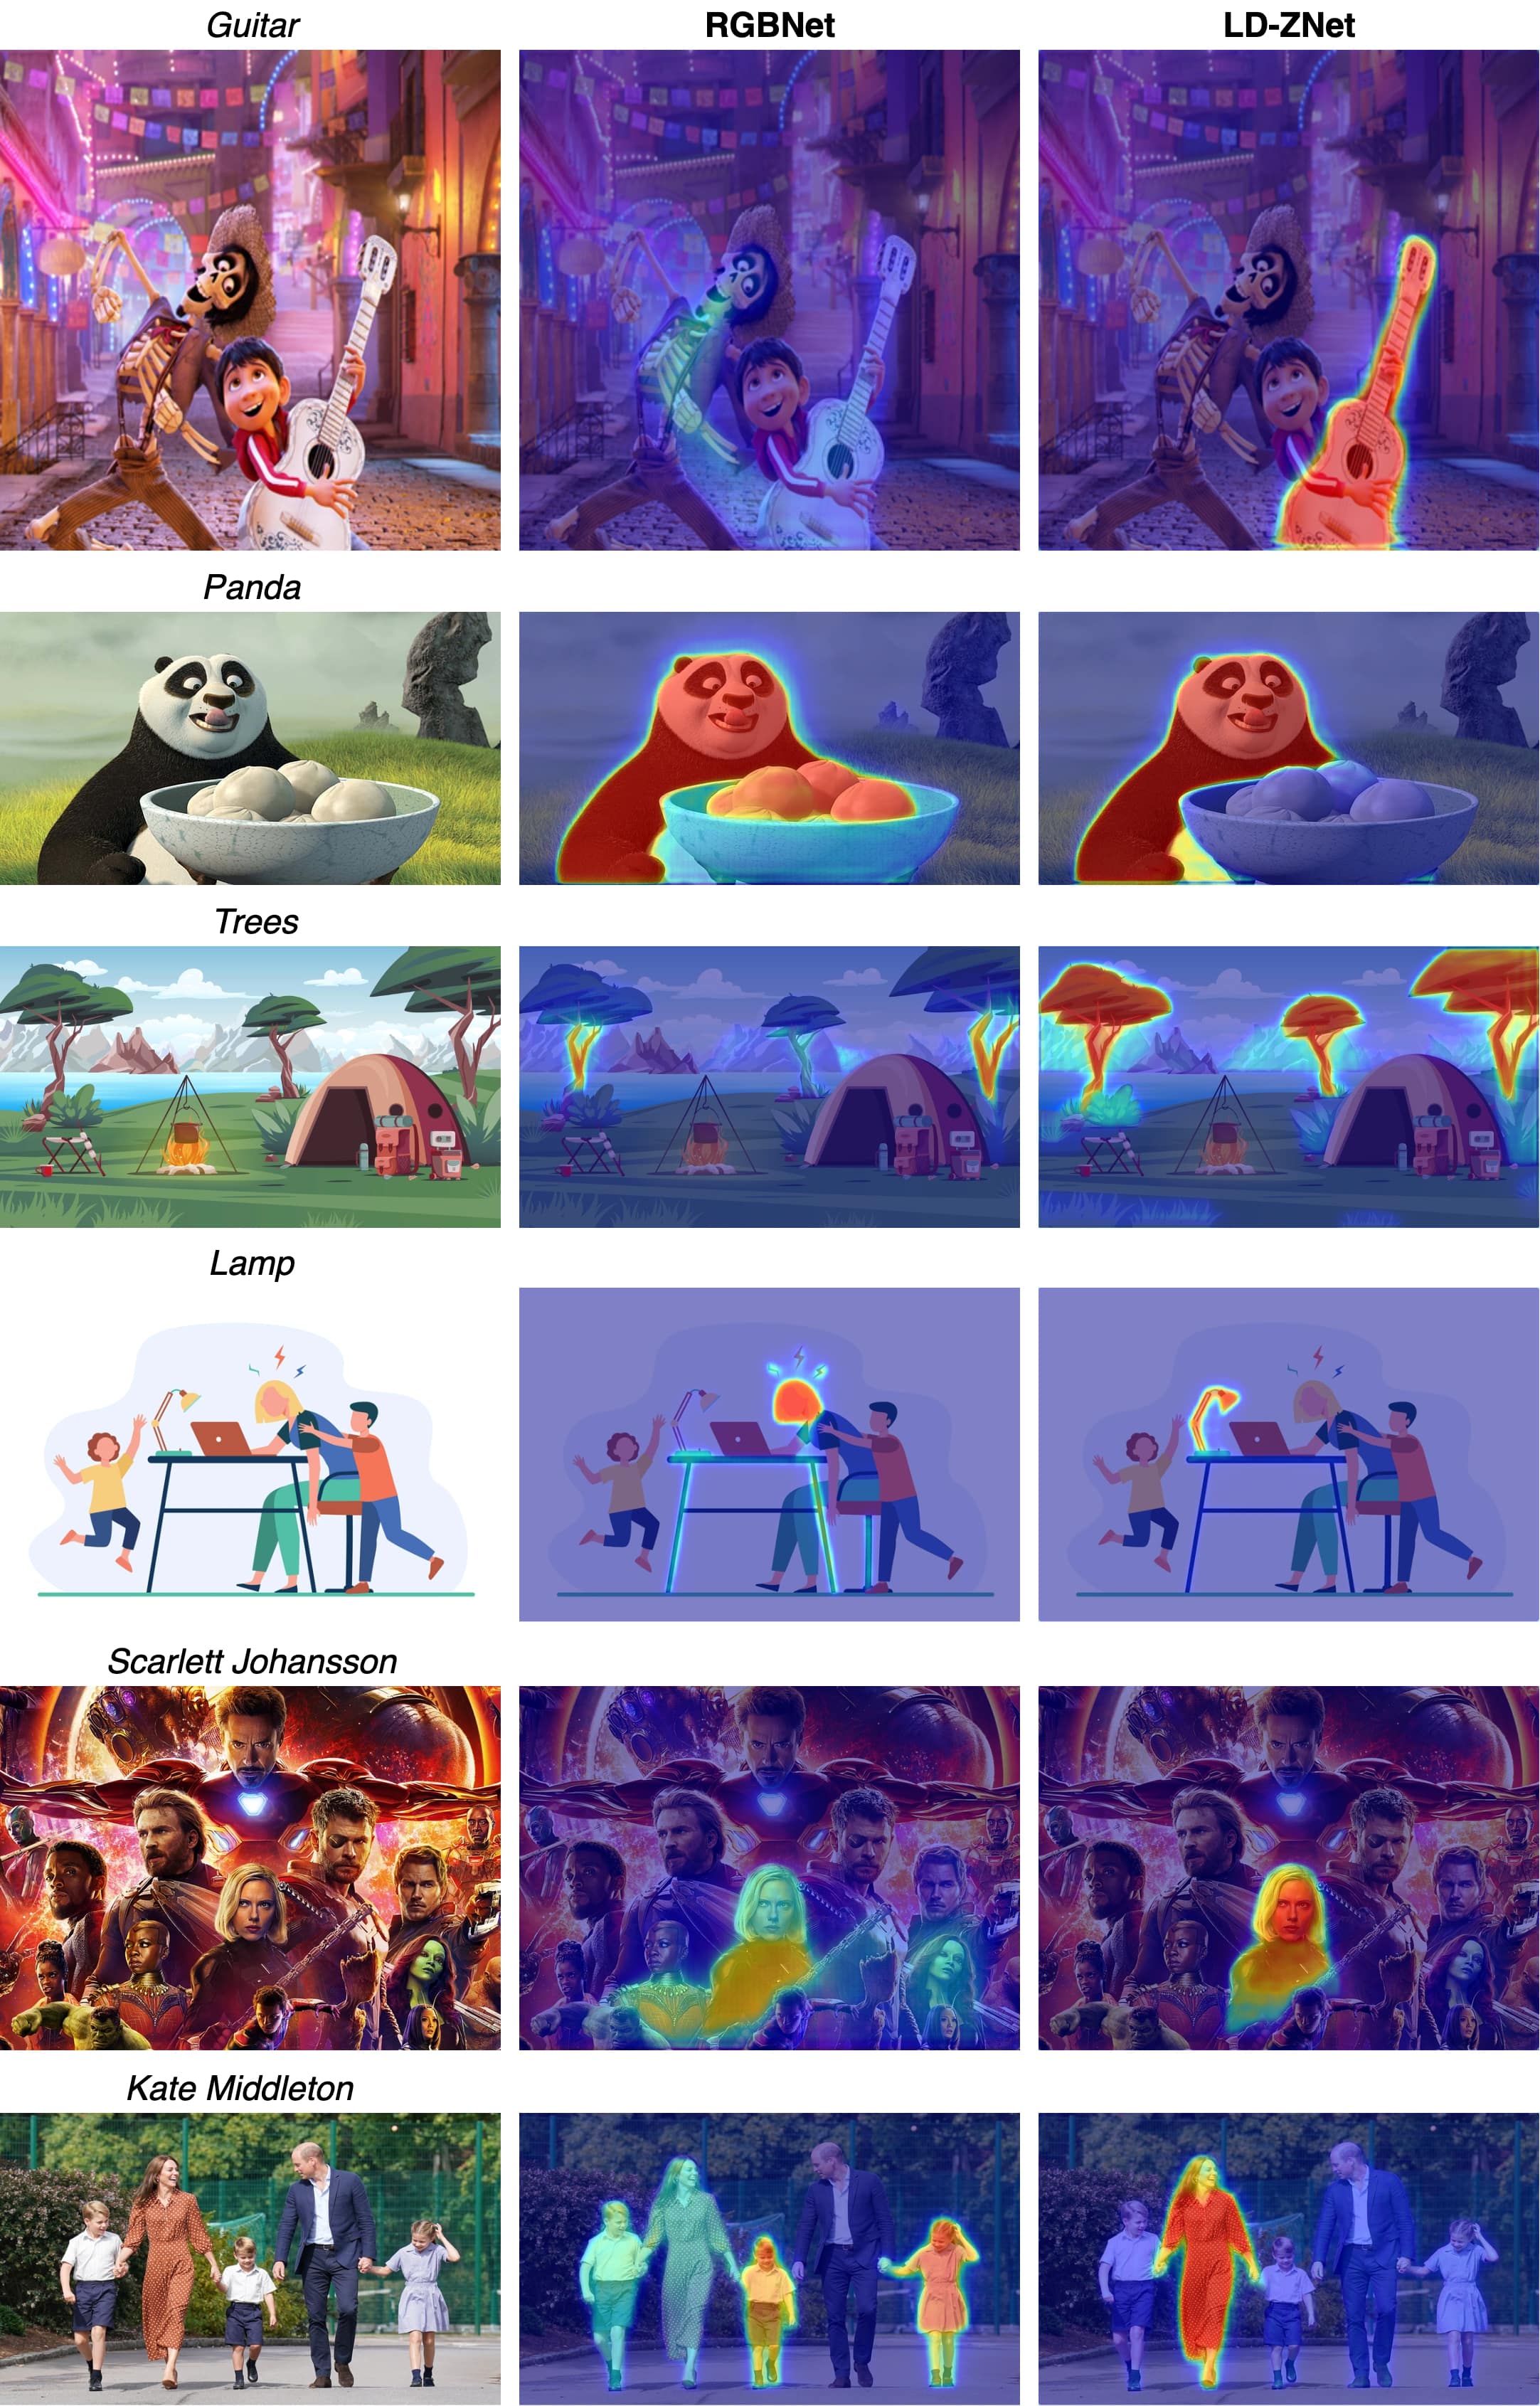 LD-ZNet can segment objects from animations, illustrations and celebrity images